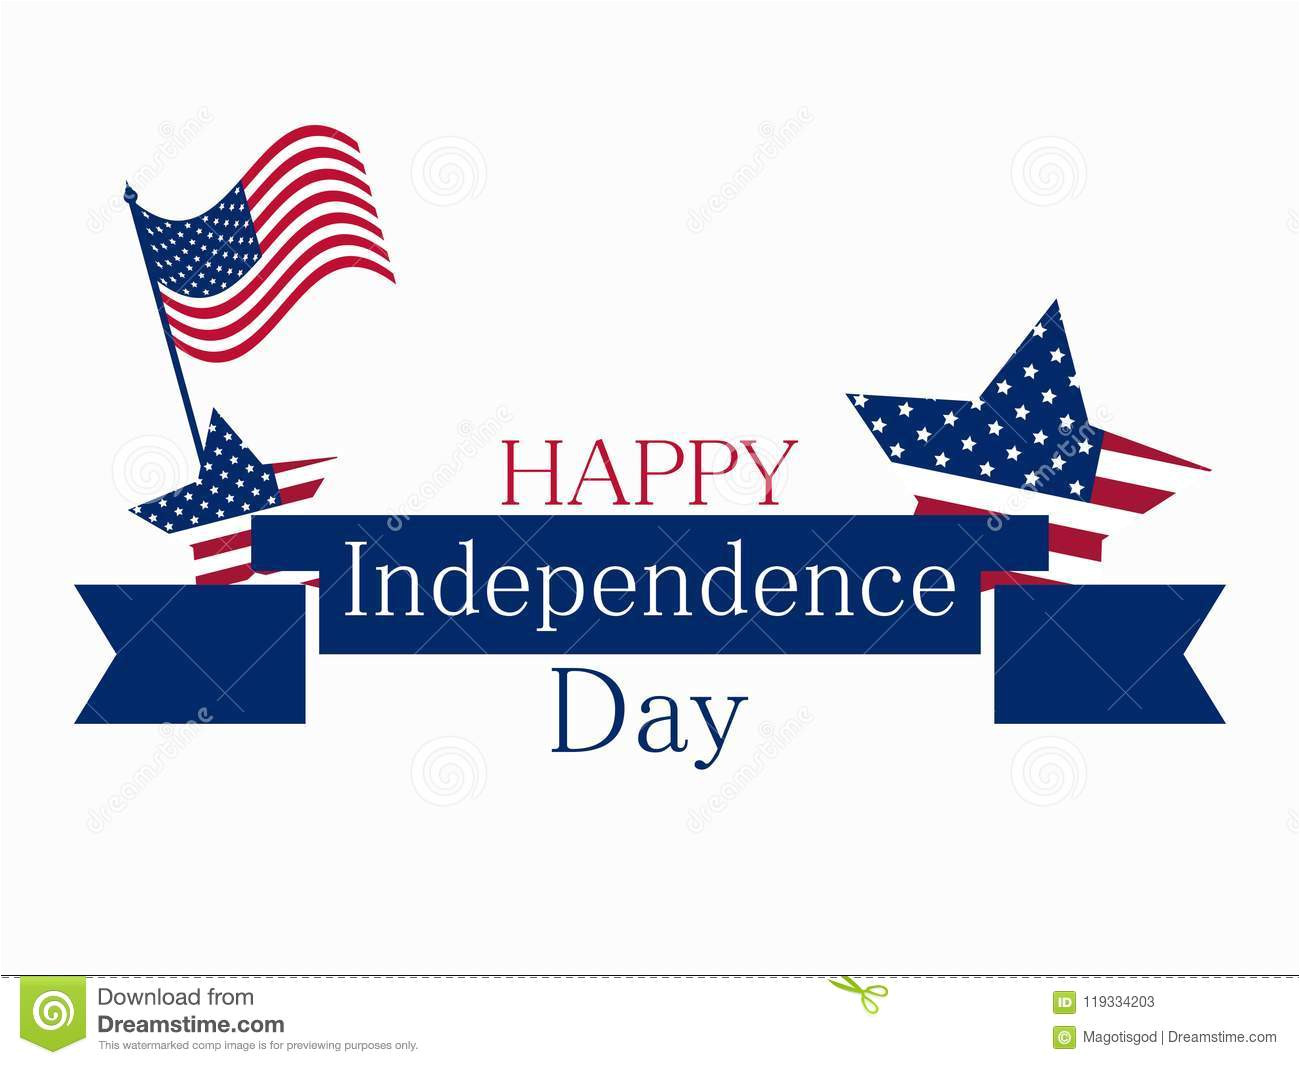 independence day th july patriotic greeting card us holidaindependence holiday vector illustration 119334203 jpg